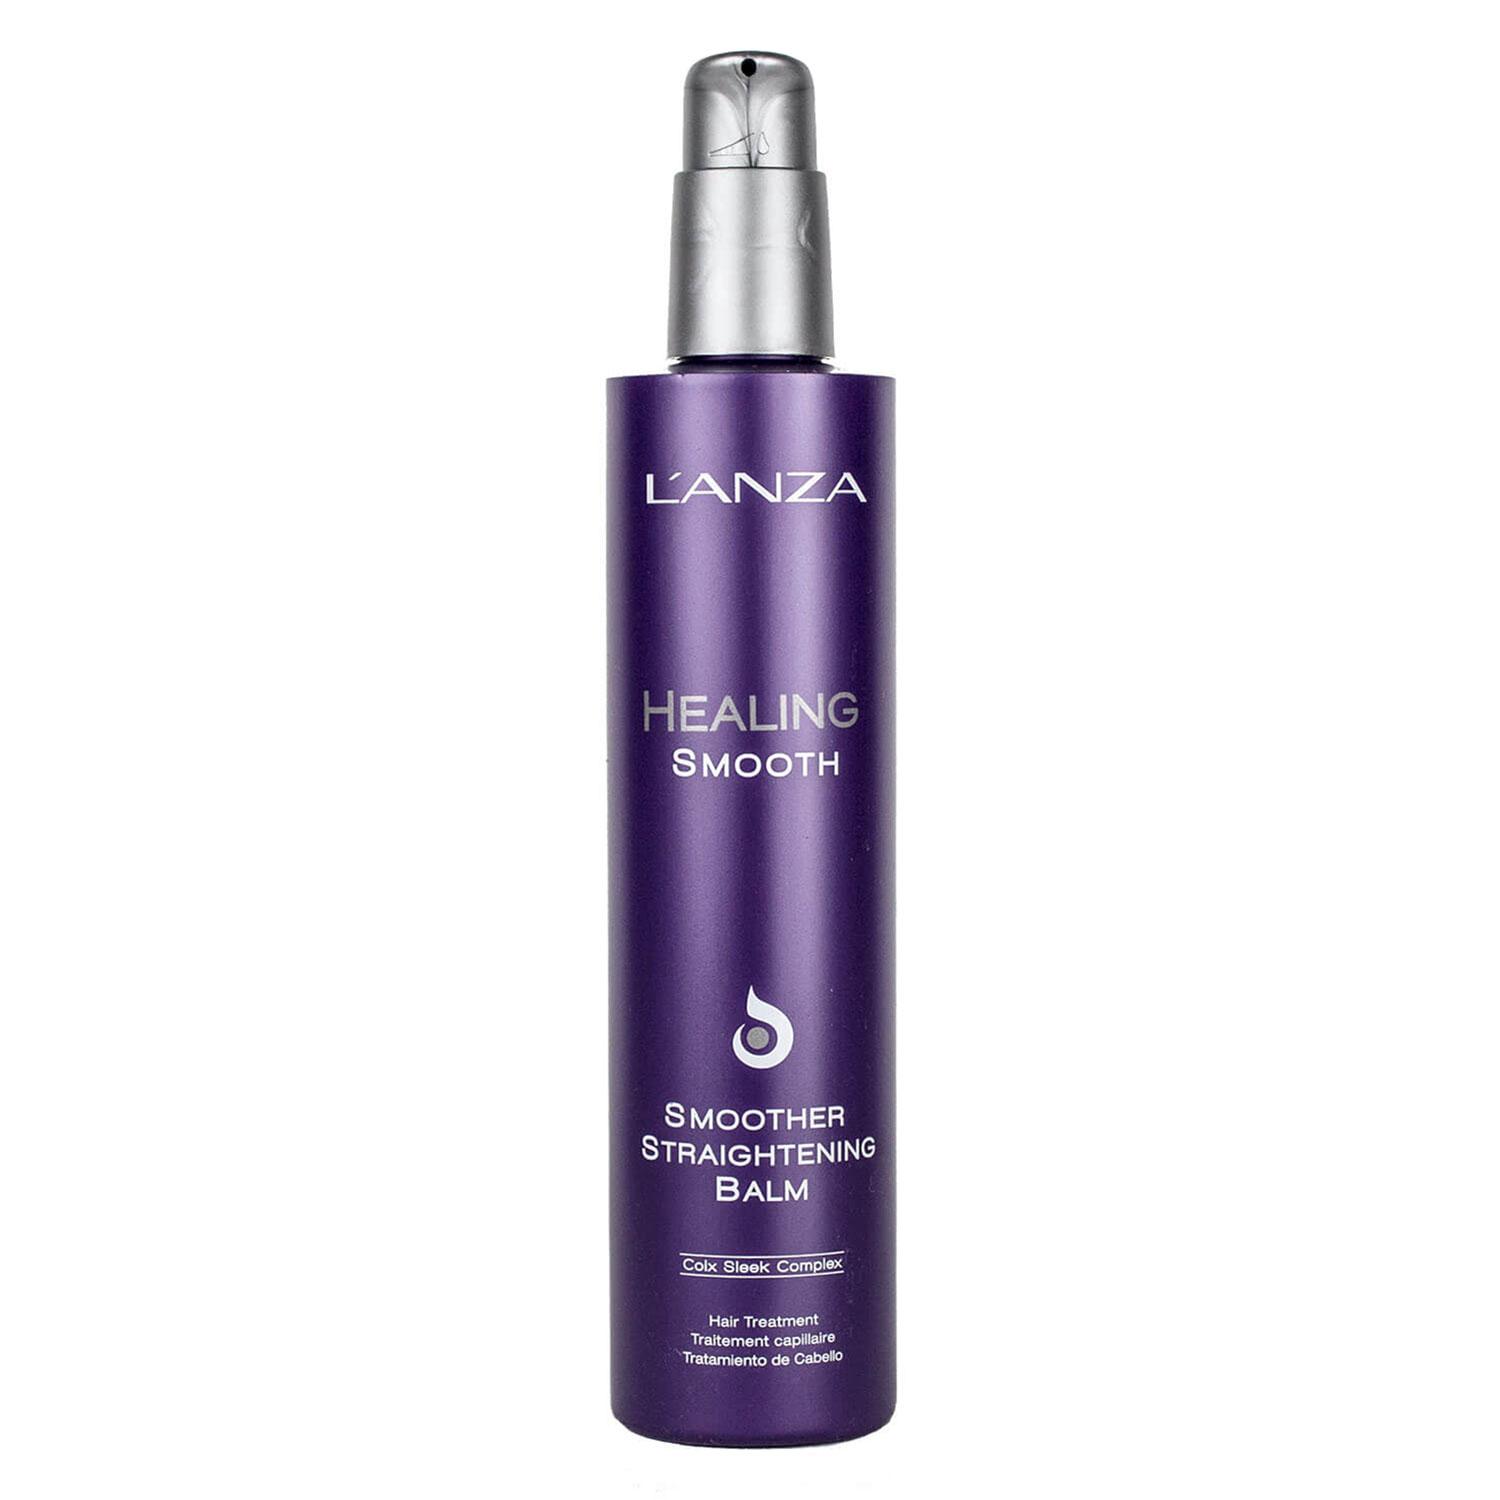 Healing Smooth - Smoother Straightening Balm